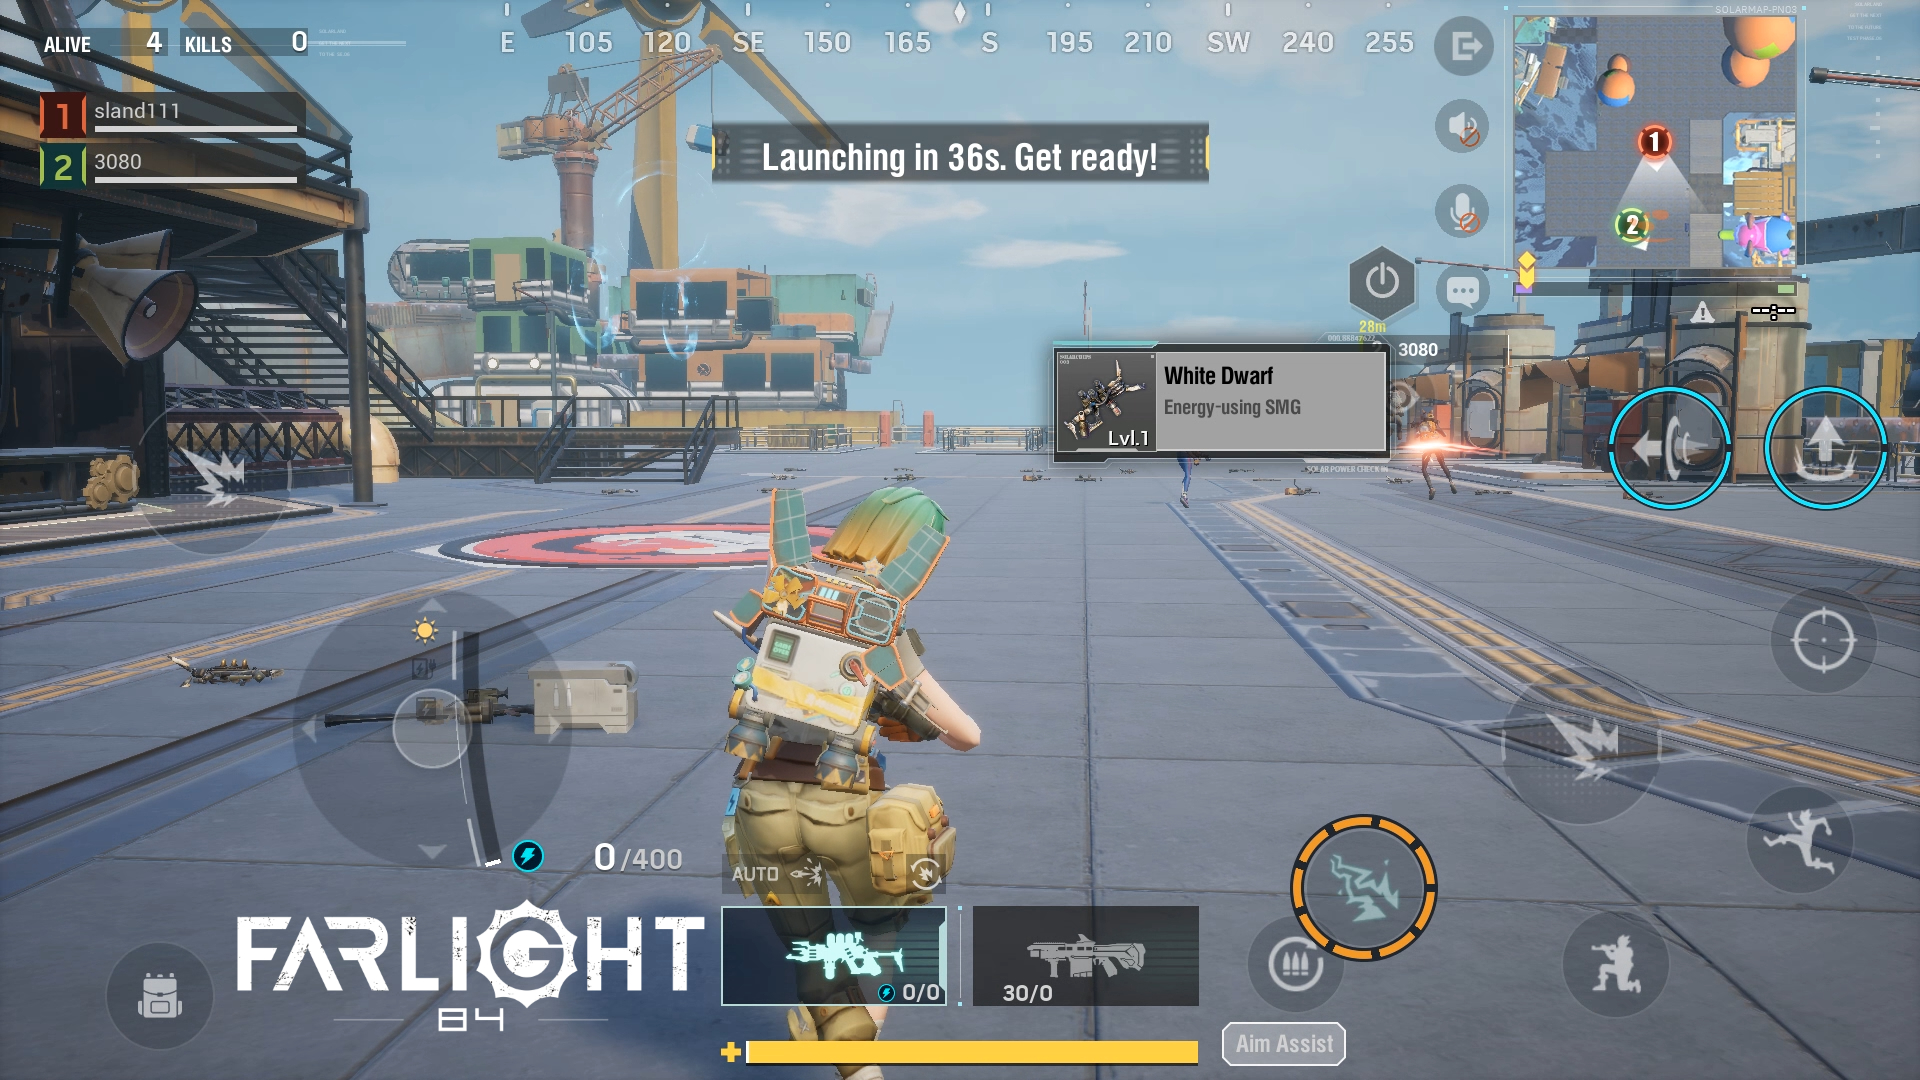 Farlight 84 Post Apocalyptic MOBA + Battle Royale Announced For Mobile And PC